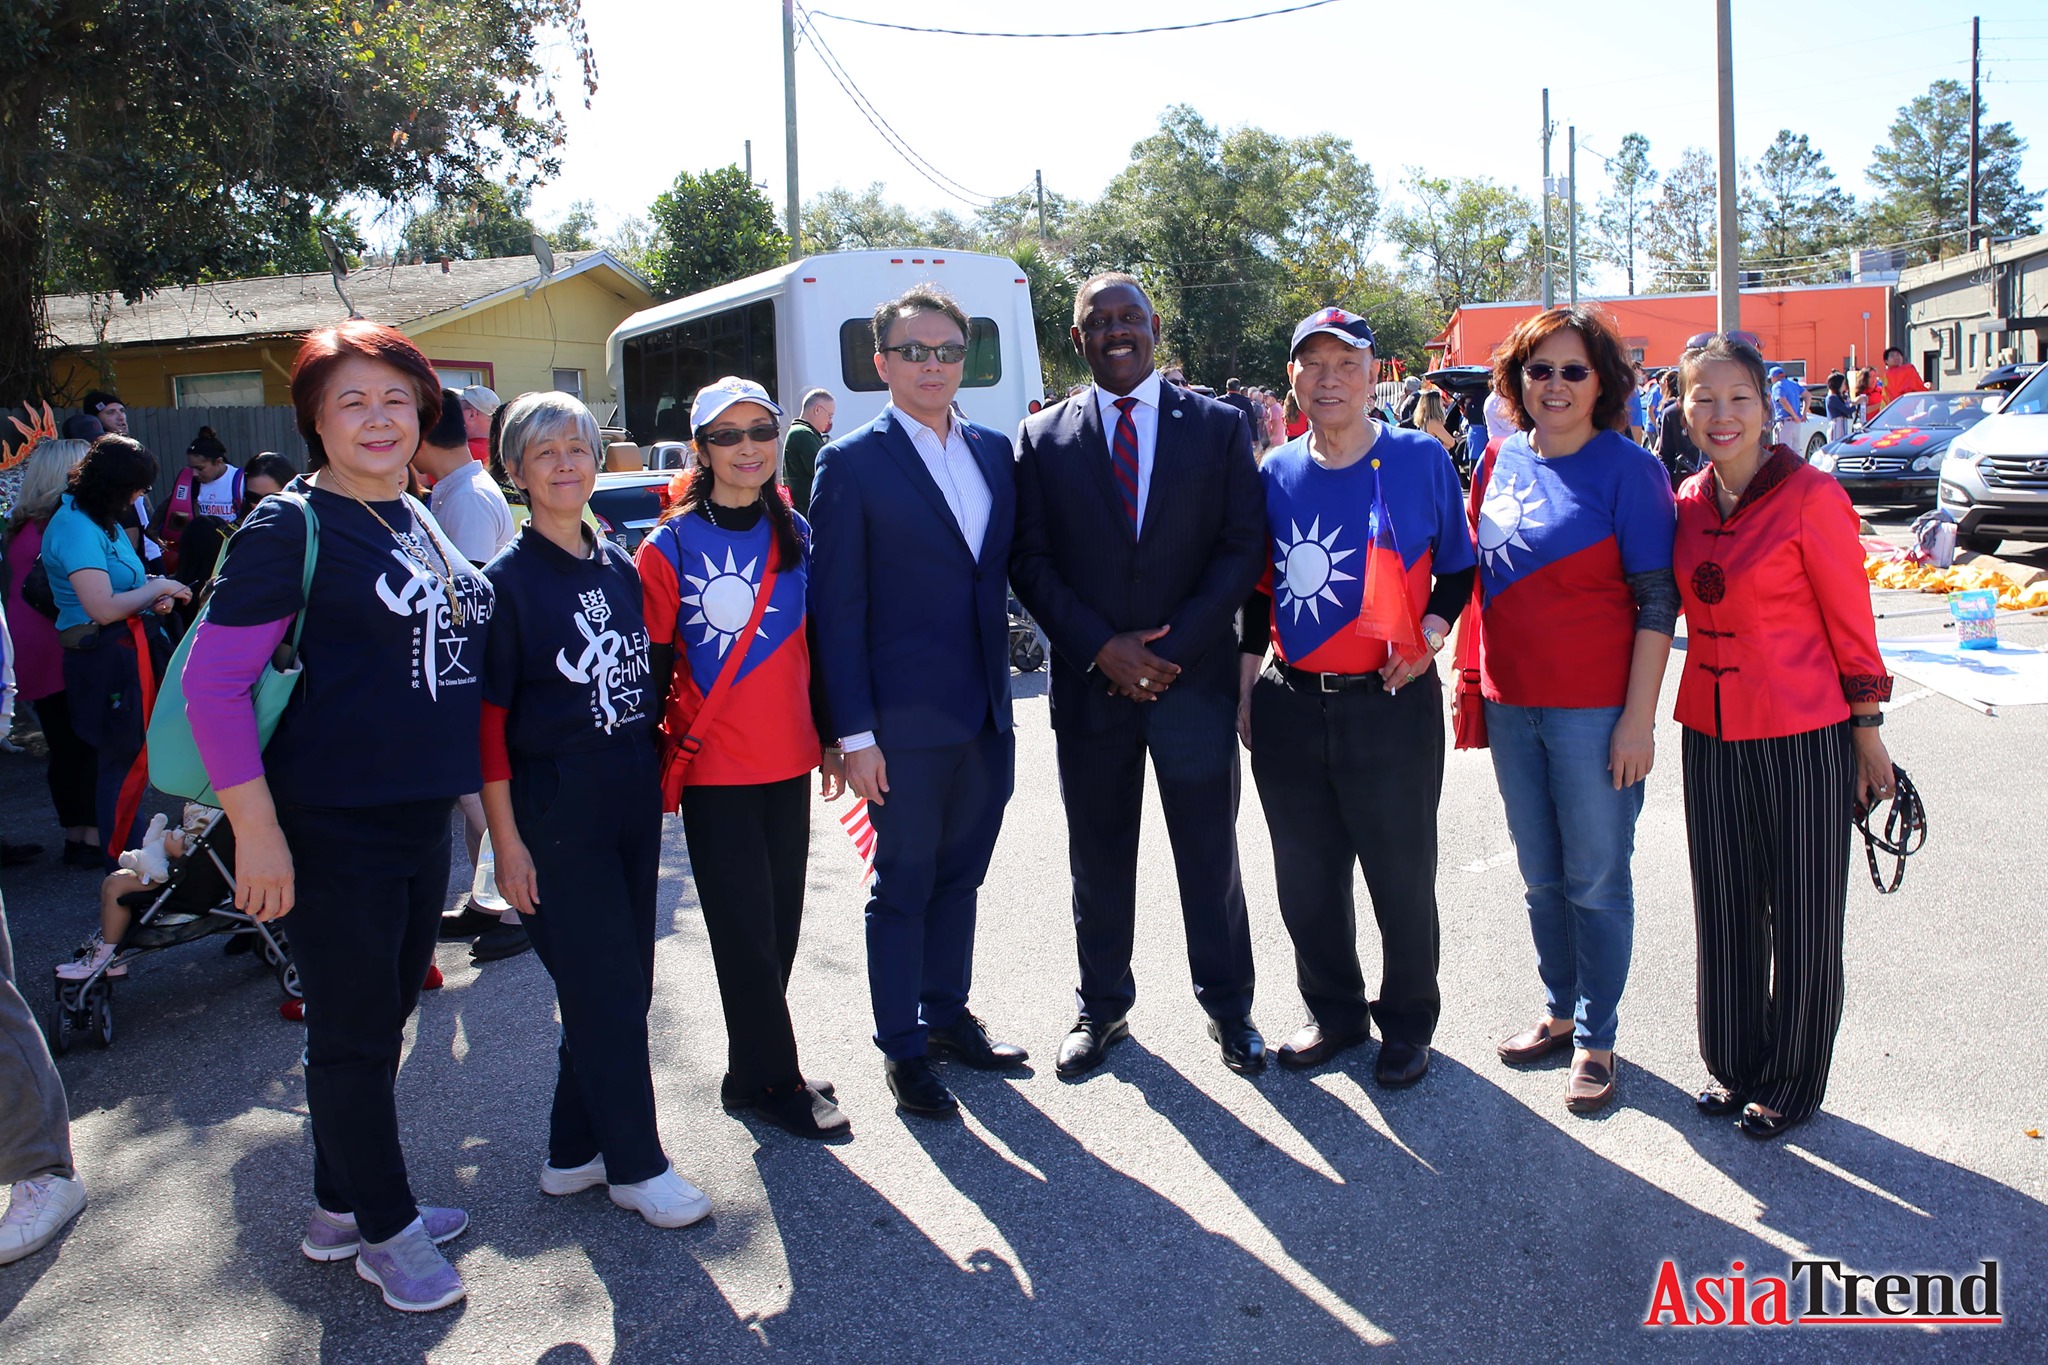 TECO in Miami Direct General David Chien, and Orange County Mayor Jerry L. Demings, with TCCGO, and the Chinese School of CAACF at the Central Florida Dragon Parade 2020